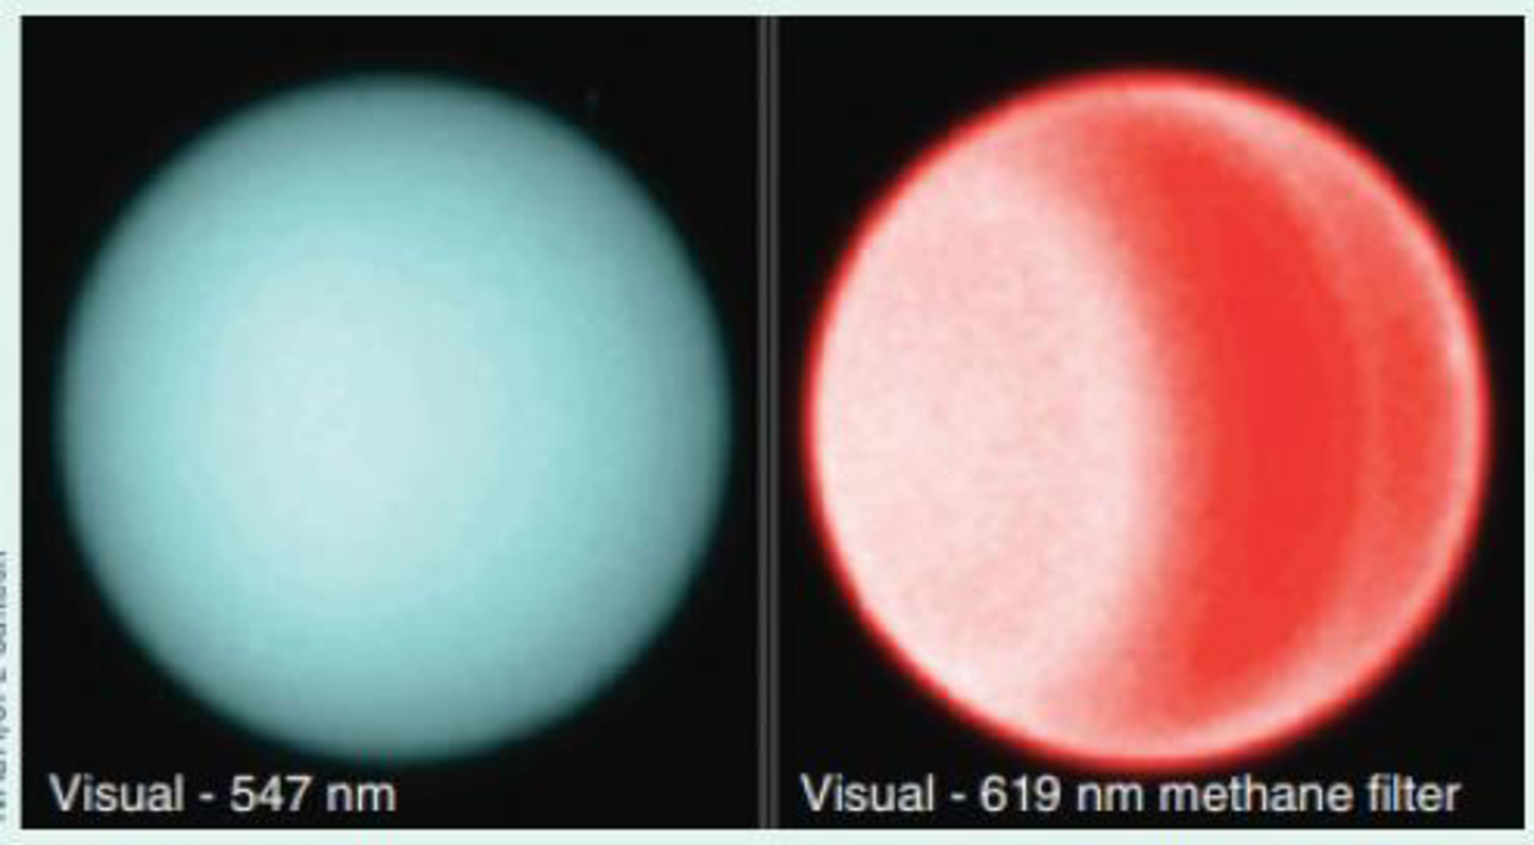 Chapter 23, Problem 6LTL, The image to the left shows how Uranus would look to the unaided human eye, whereas the right image 